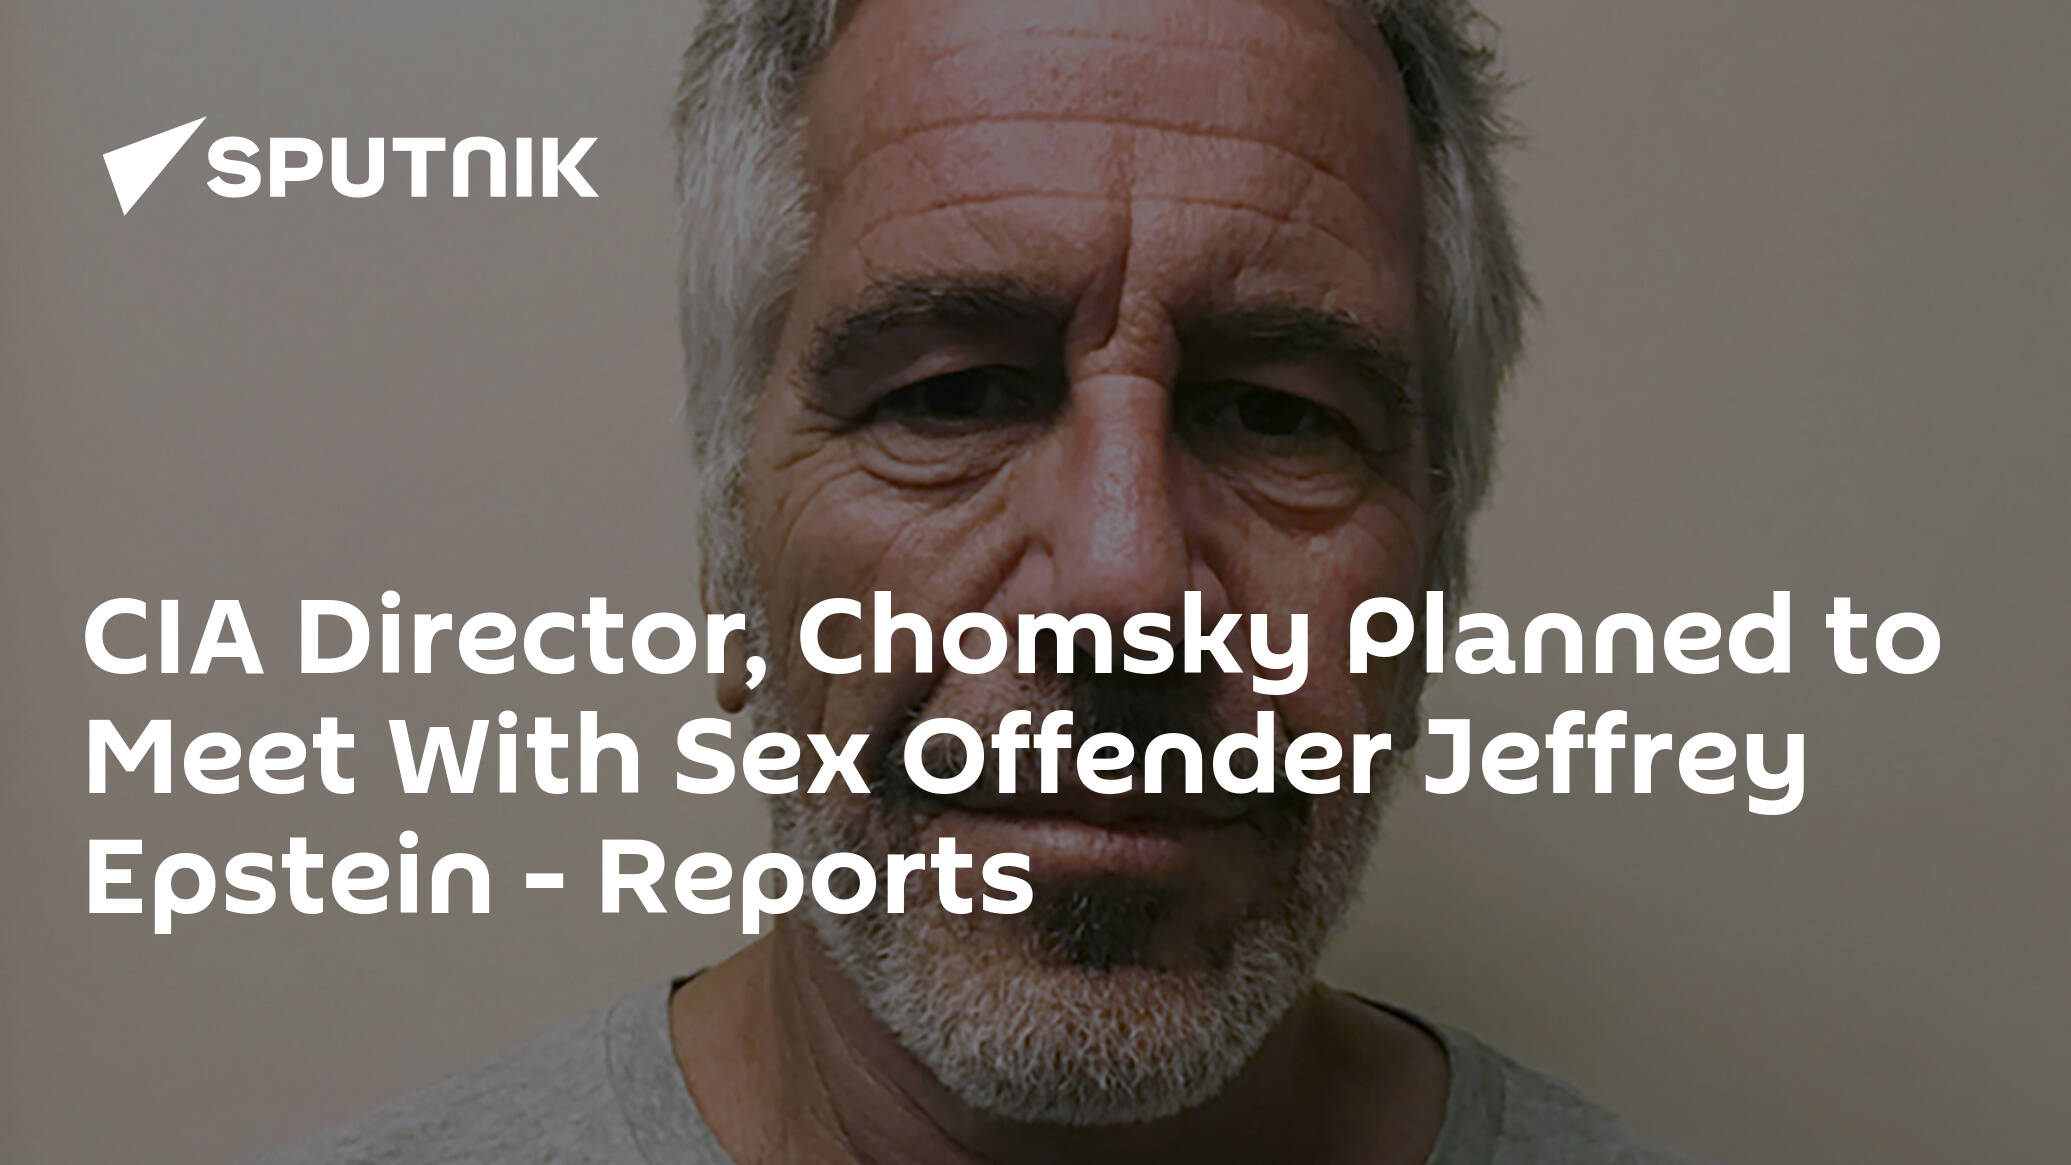 CIA Director, Chomsky Planned to Meet With Sex Offender Jeffrey Epstein – Reports